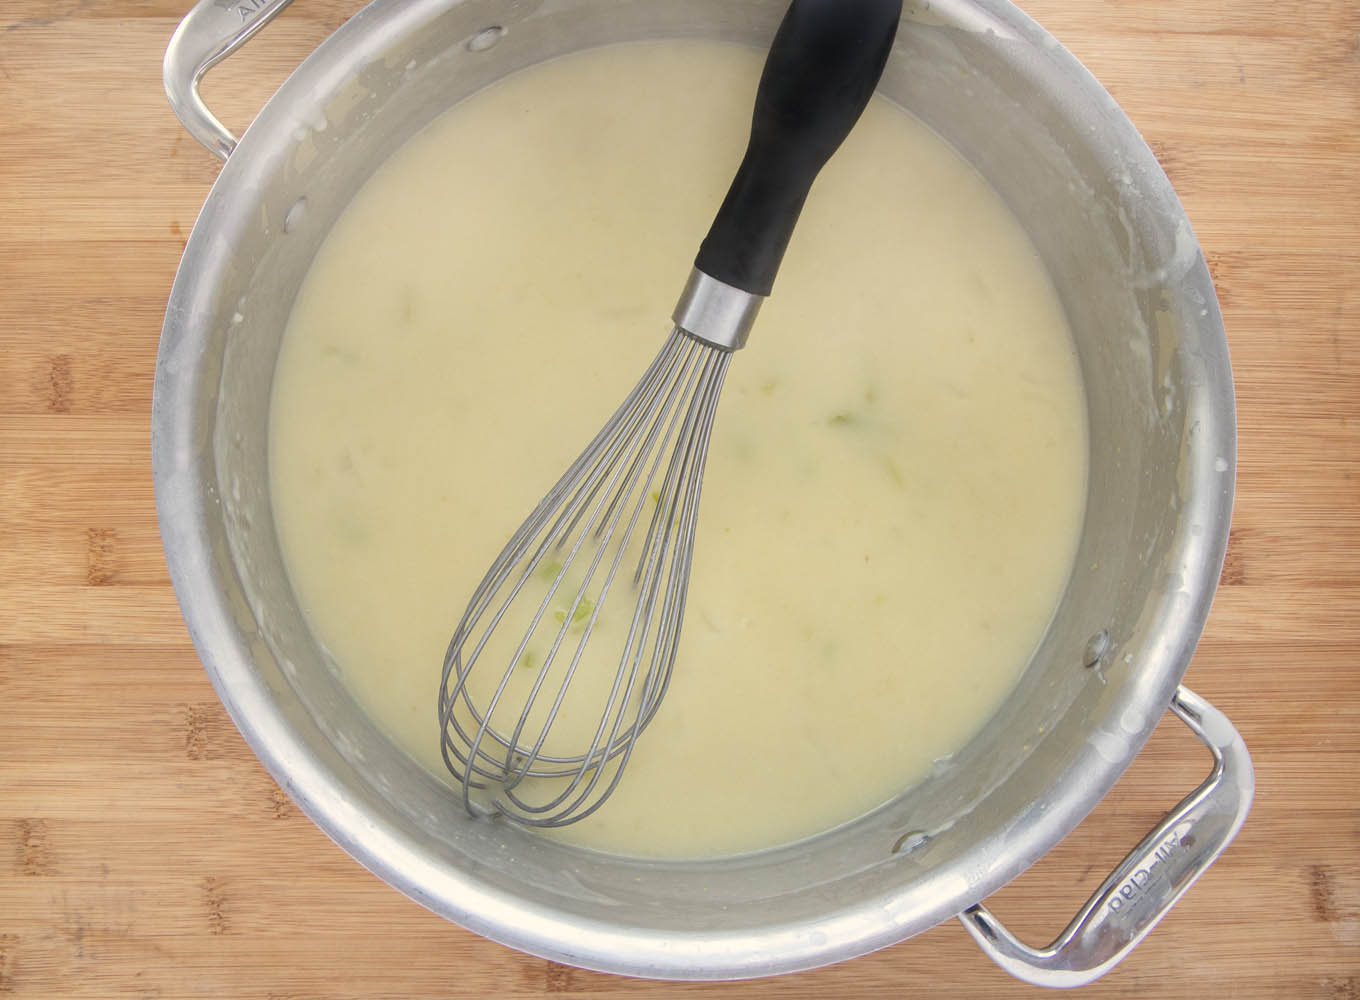 Veloute in a large pot with a wire whisk